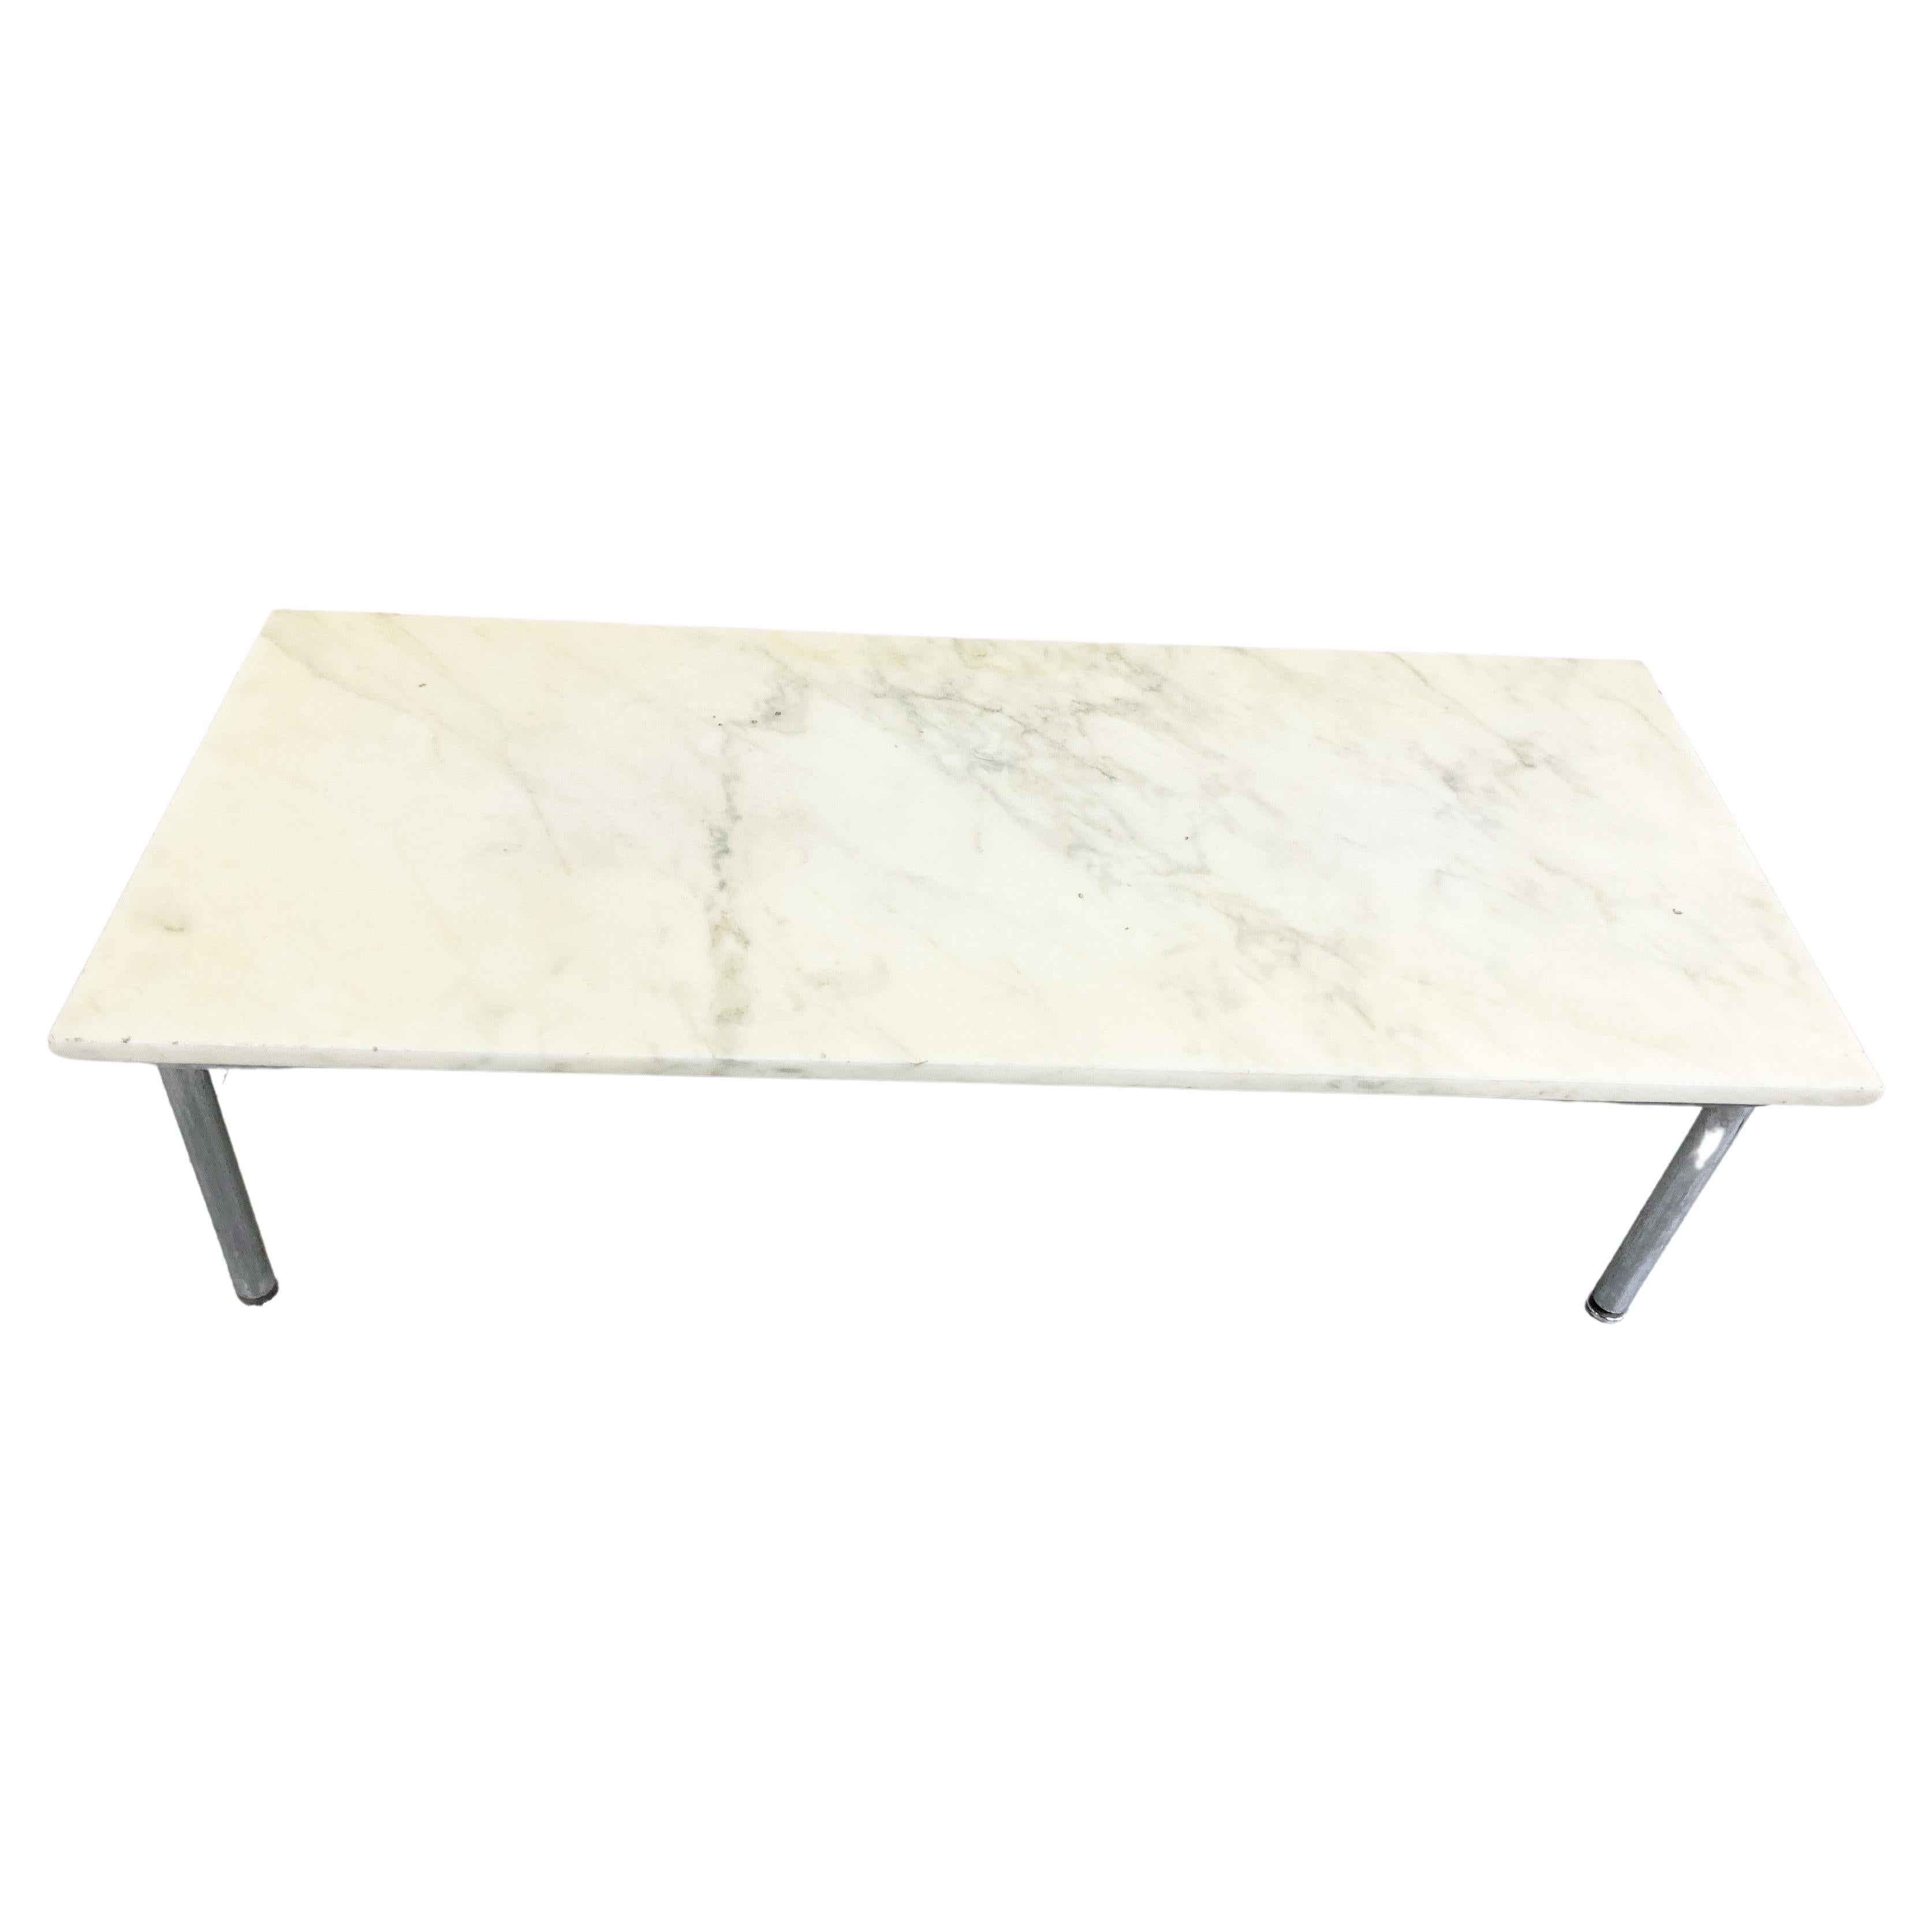 Vintage White Marble Coffee Table, 1960s For Sale